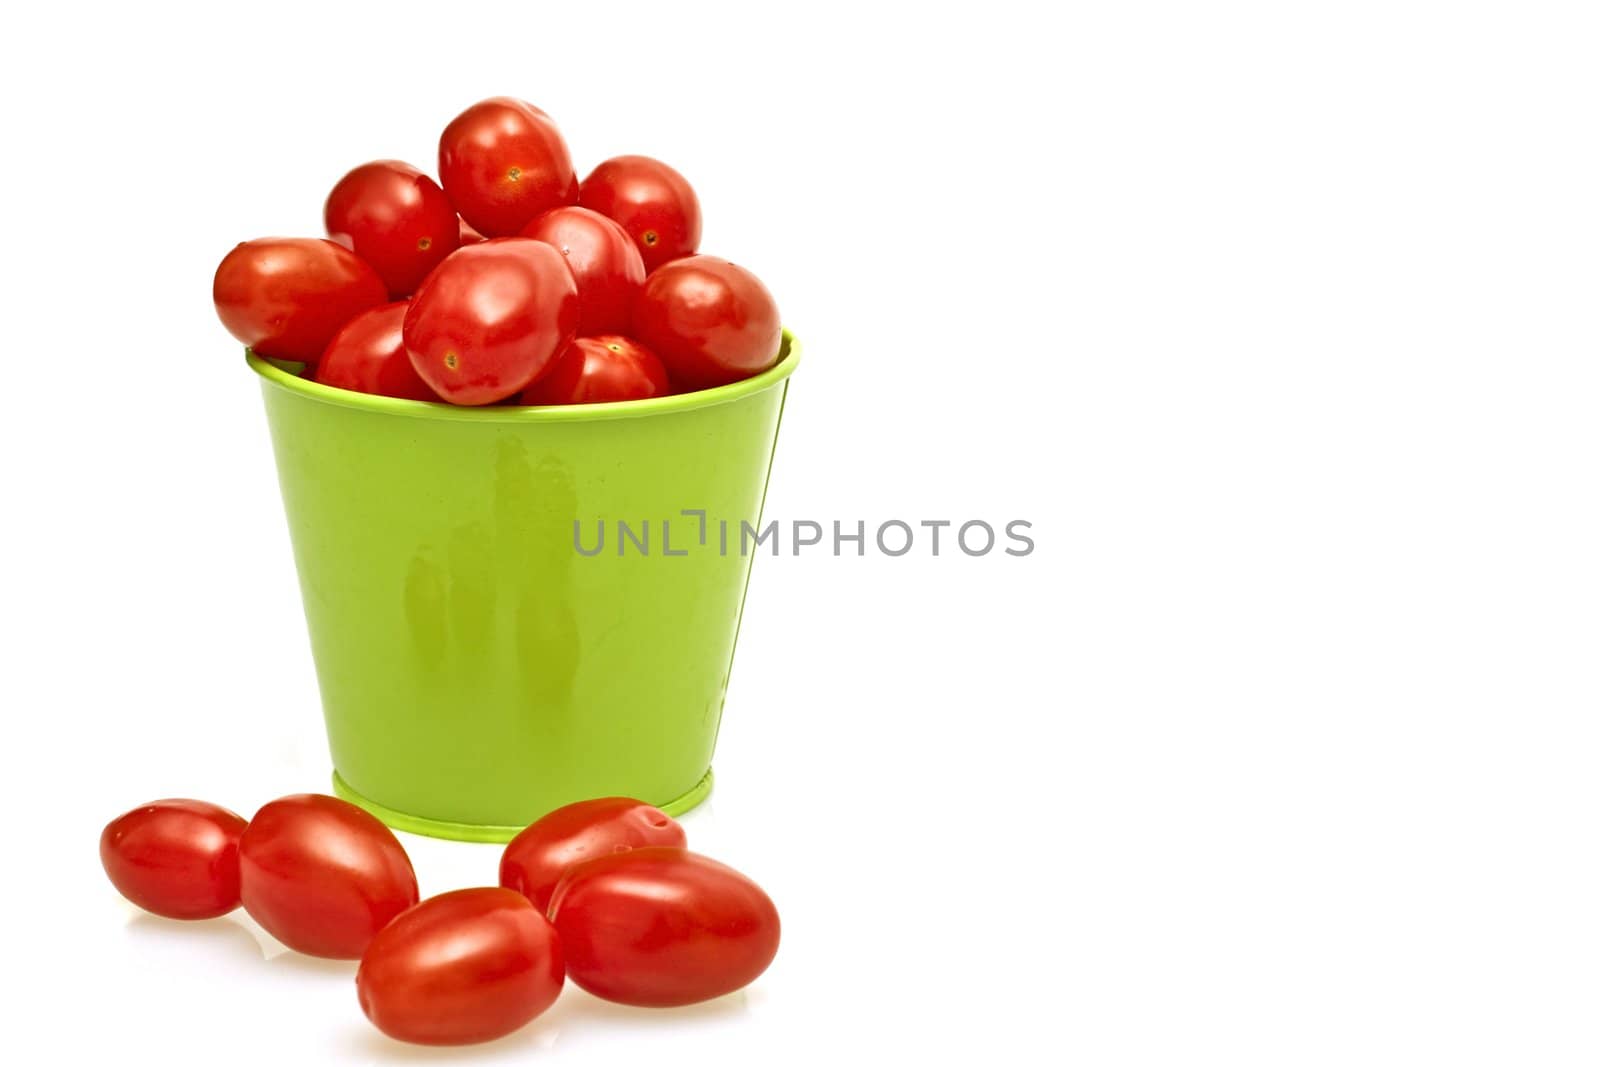 Tomatoes in a green bucket